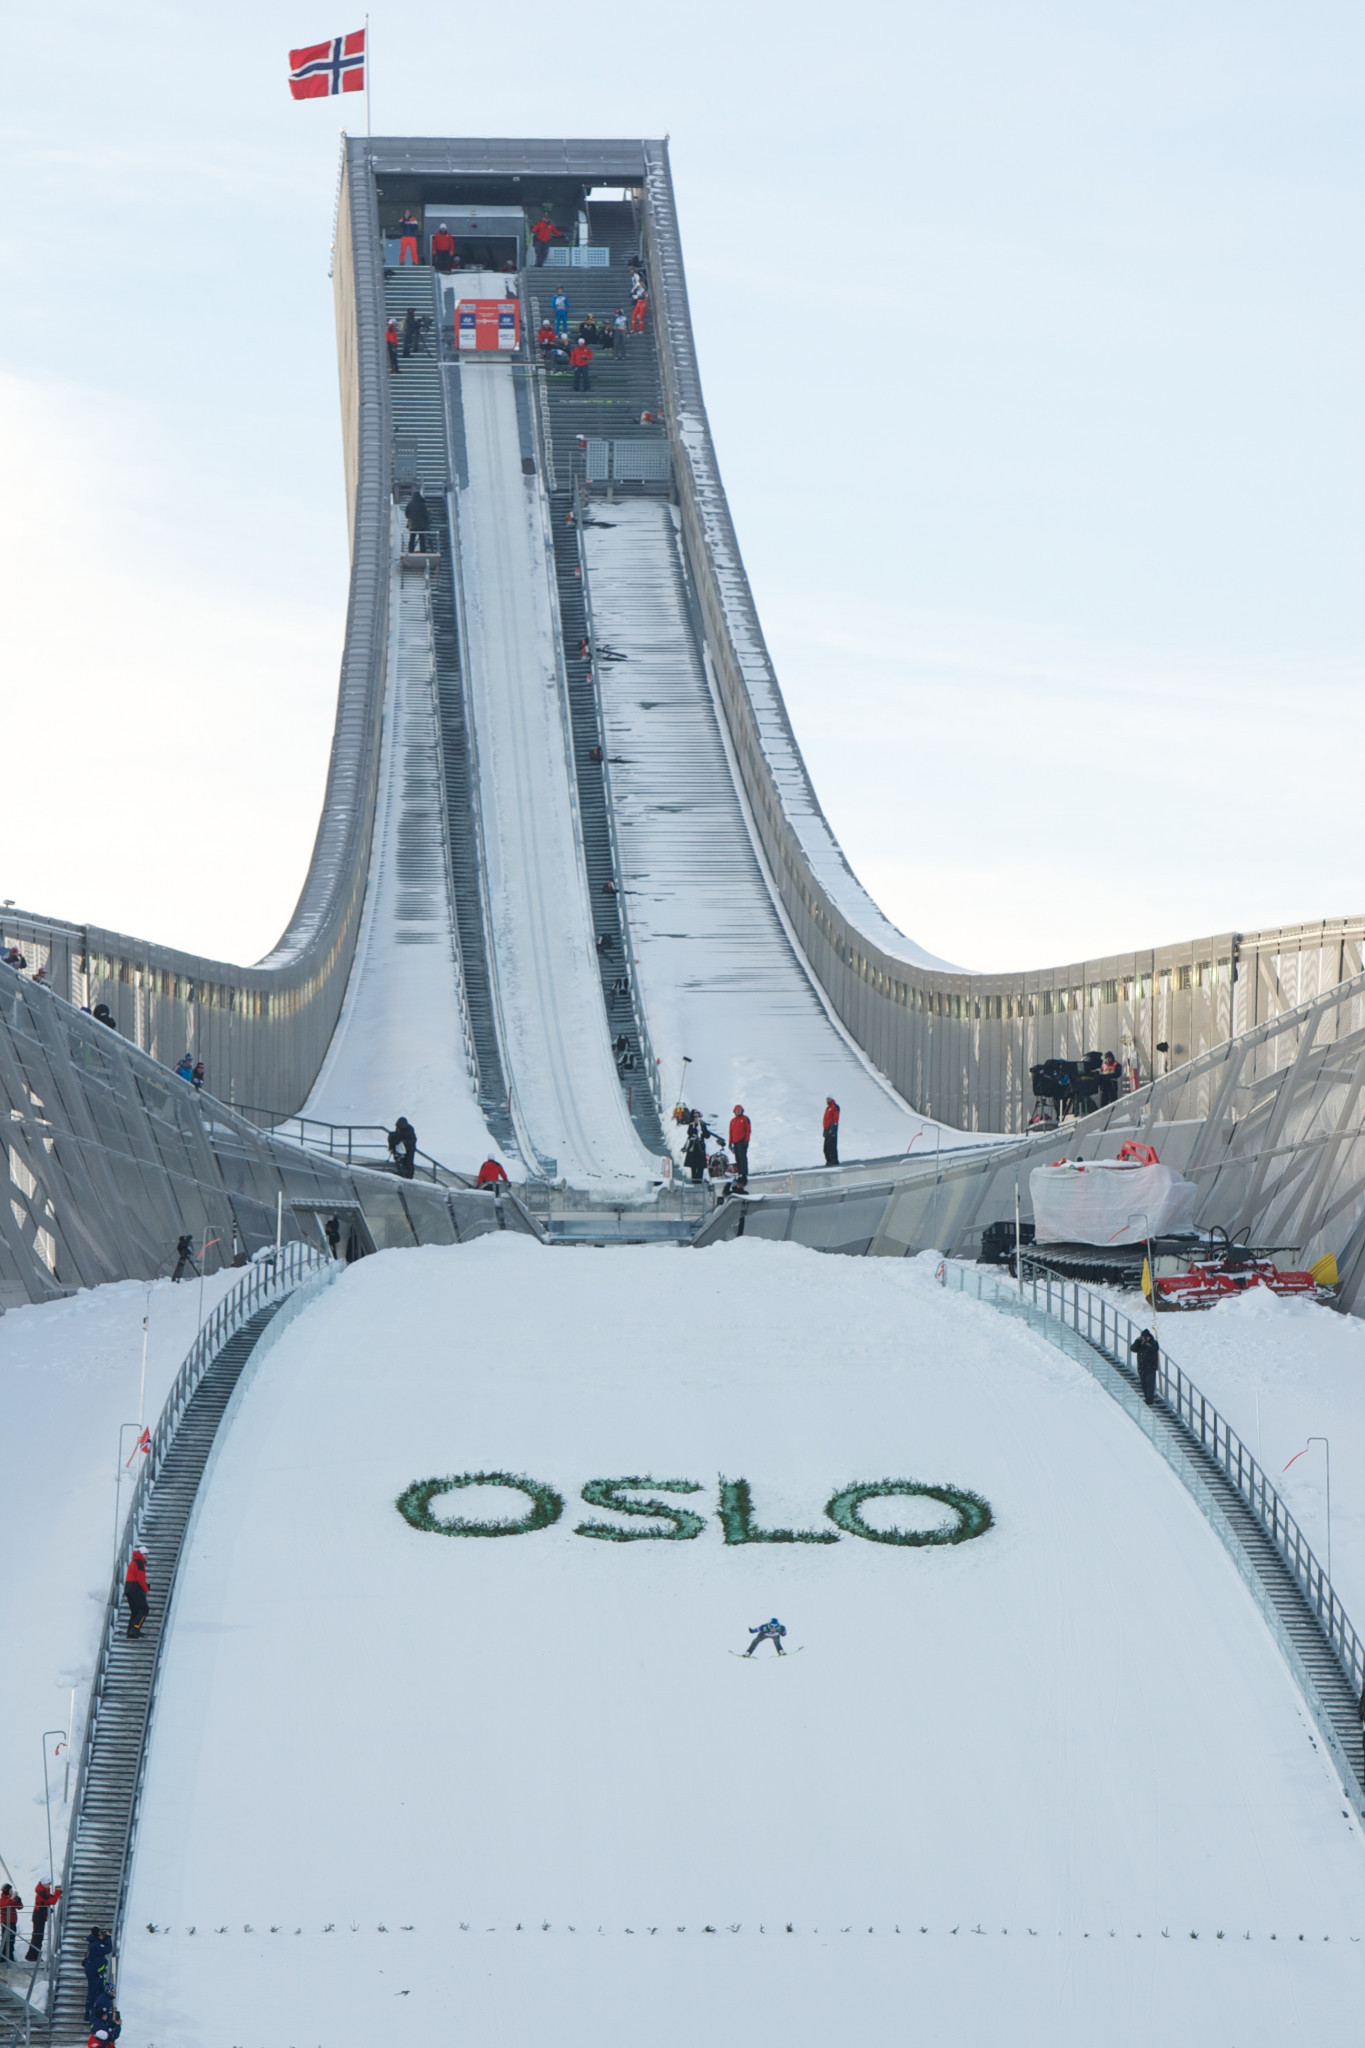 Ski Jumping World Cup to resume with Raw Air action in Oslo